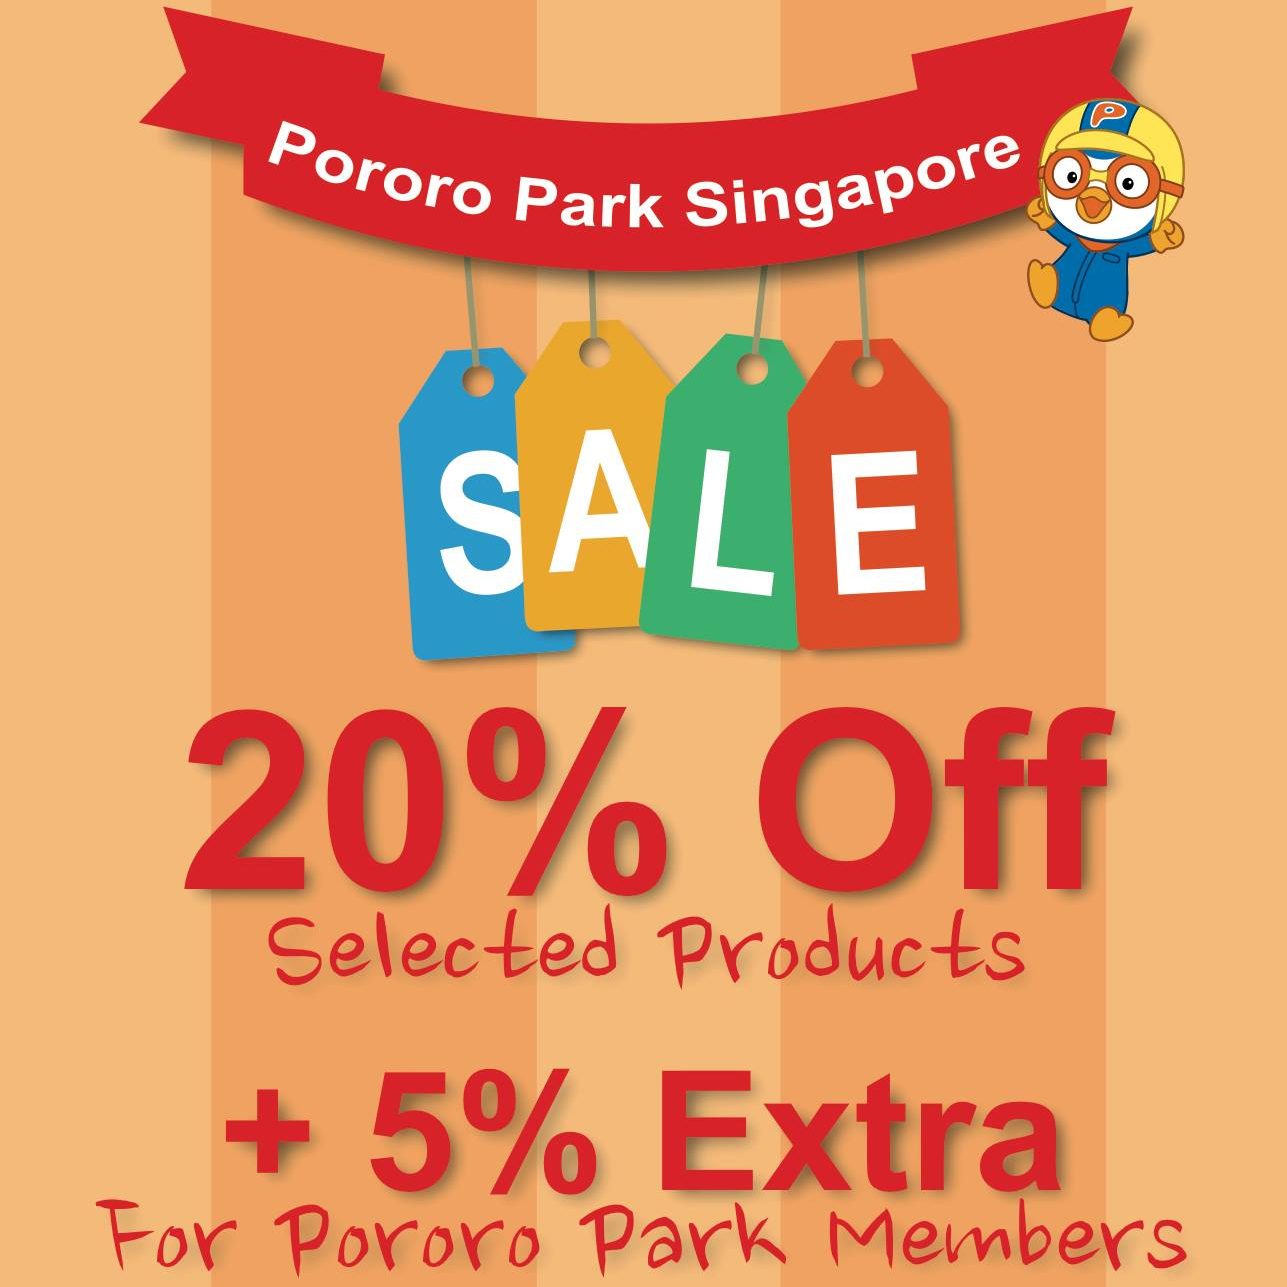 Pororo Park SG Sale Up to 20% Off ends 14 Aug 2016